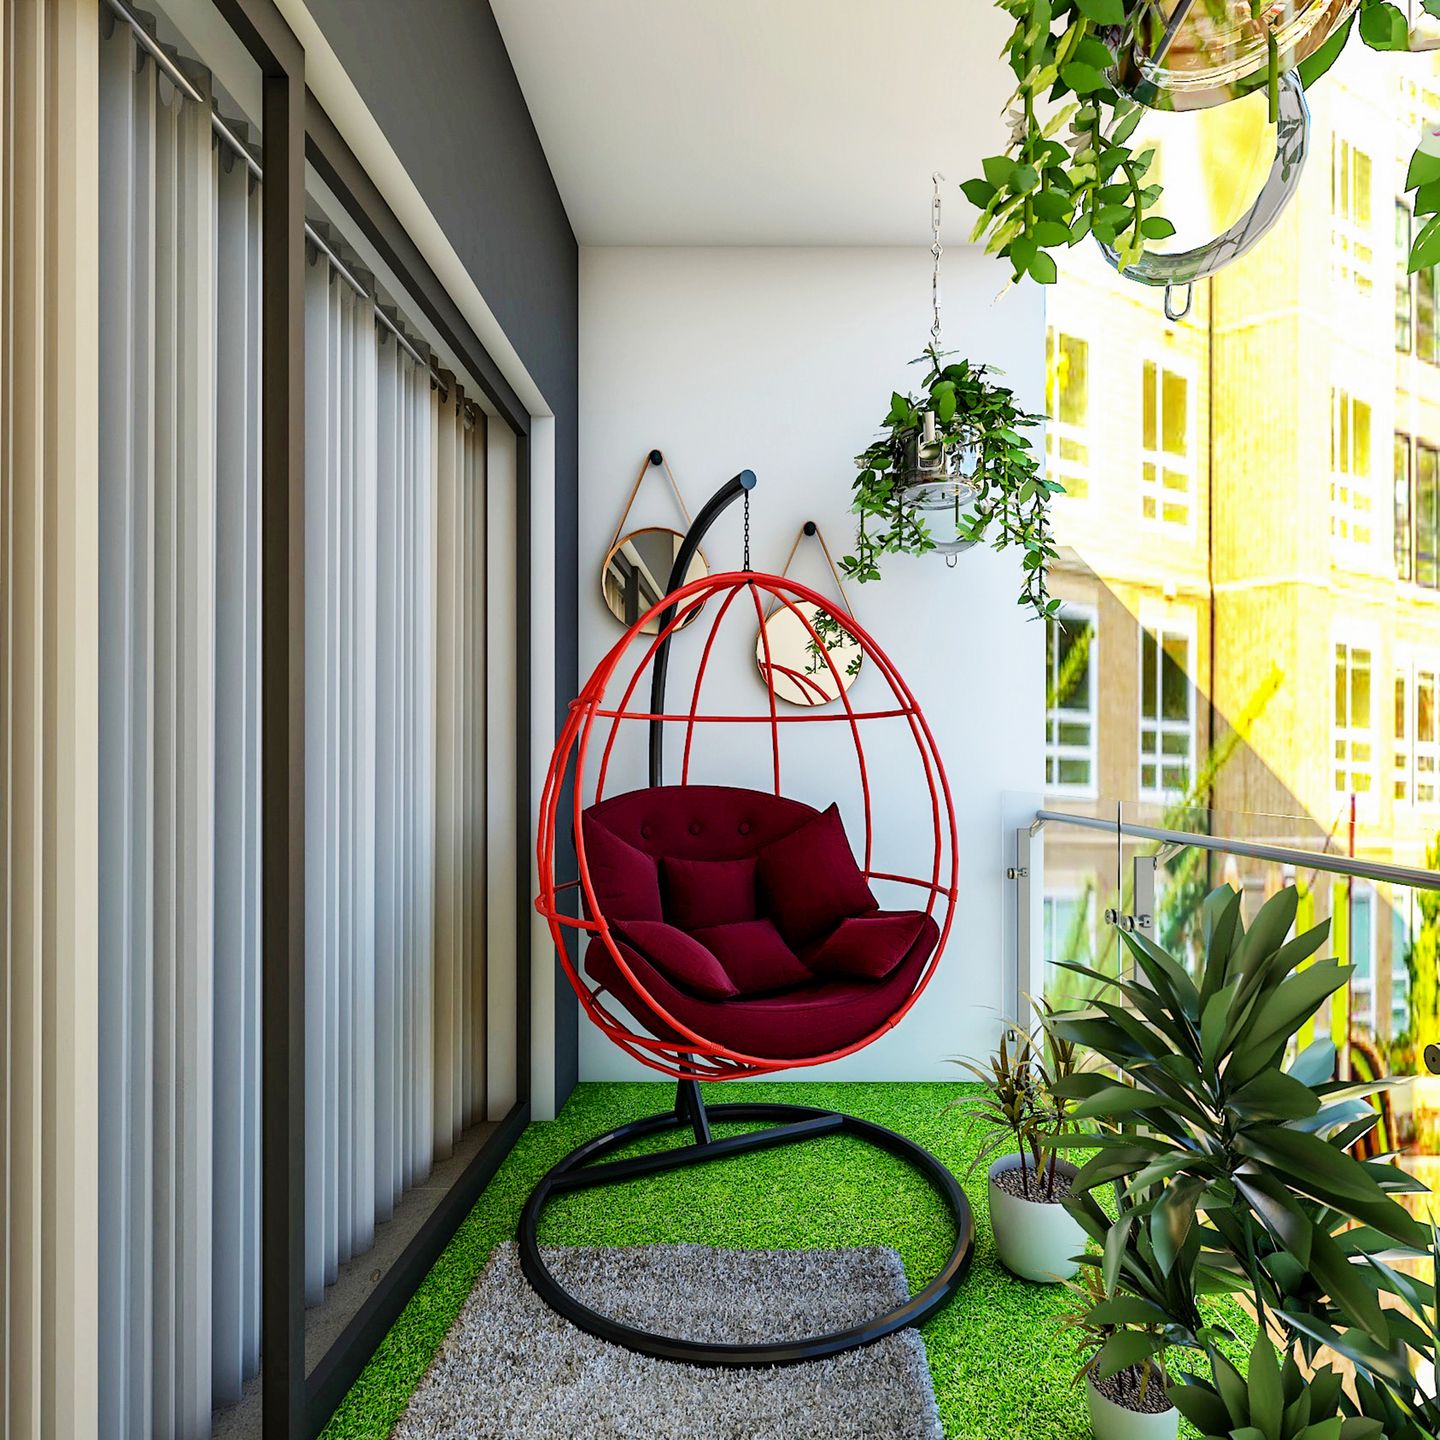 Compact Balcony Design with Red Swing Chair with Planters - Livspace